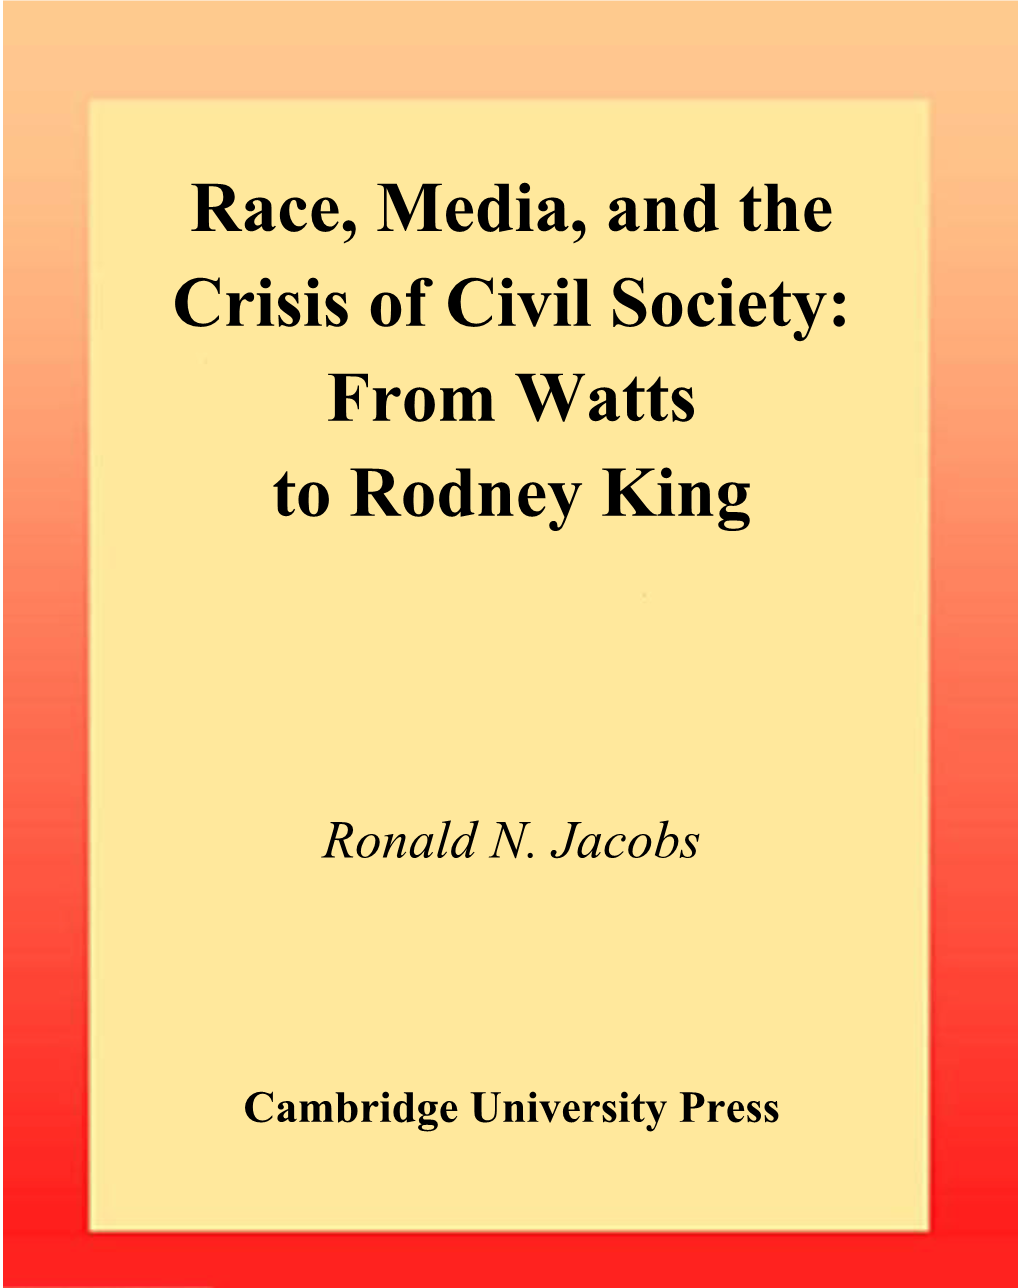 Race, Media, and the Crisis of Civil Society: from Watts to Rodney King